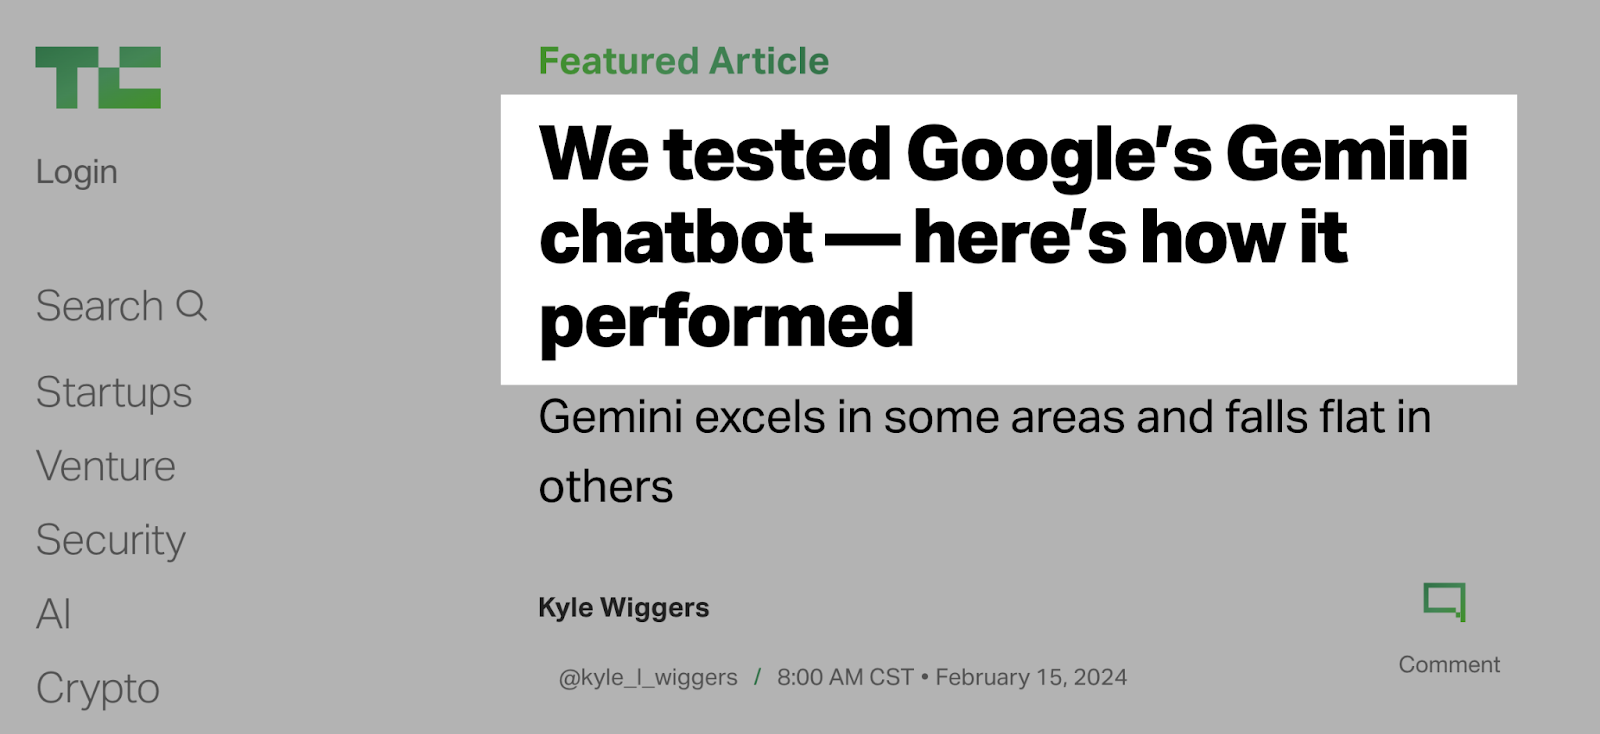 TechCrunch article's H1 tag that reads: "We tested Google’s Gemini chatbot—here’s how it performed"